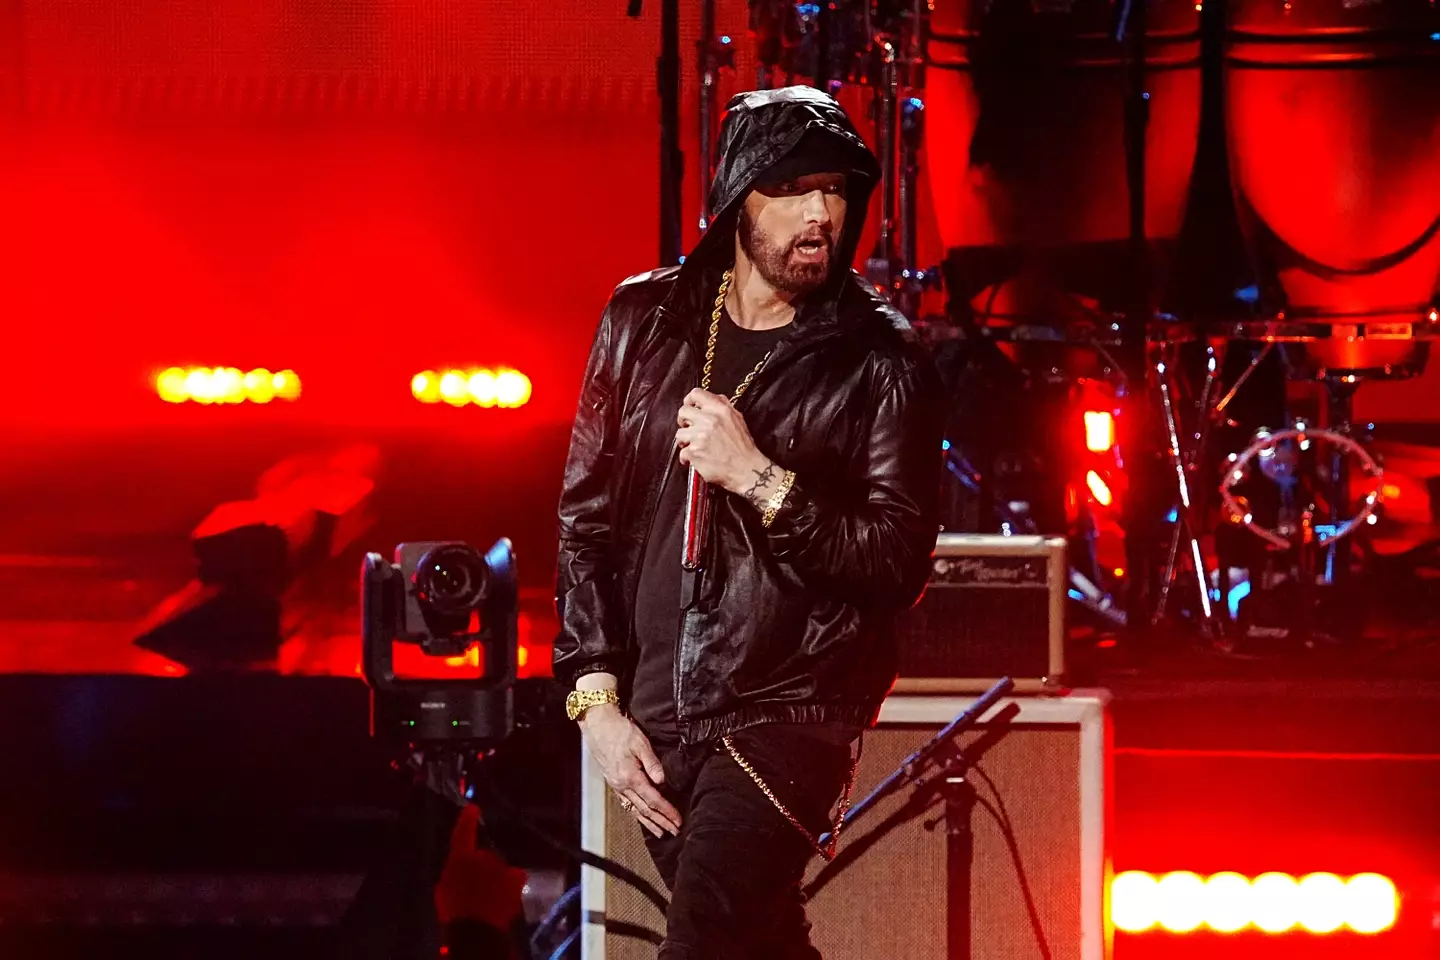 Eminem is now one of the world's biggest rappers.